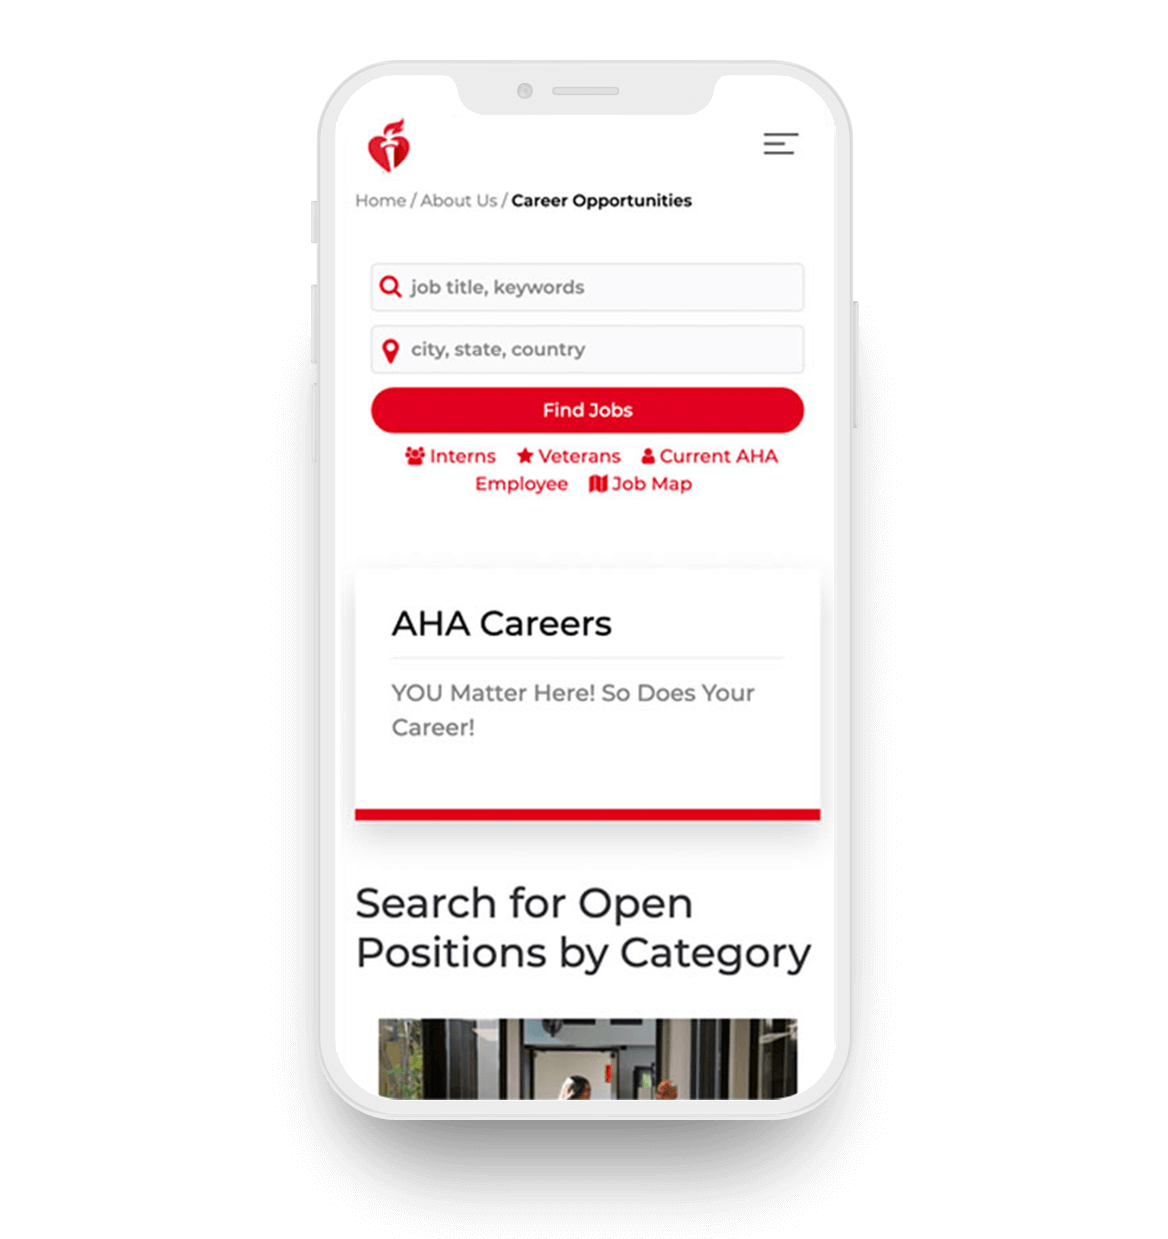 Mobile phone screen displaying American Heart Association career opportunities